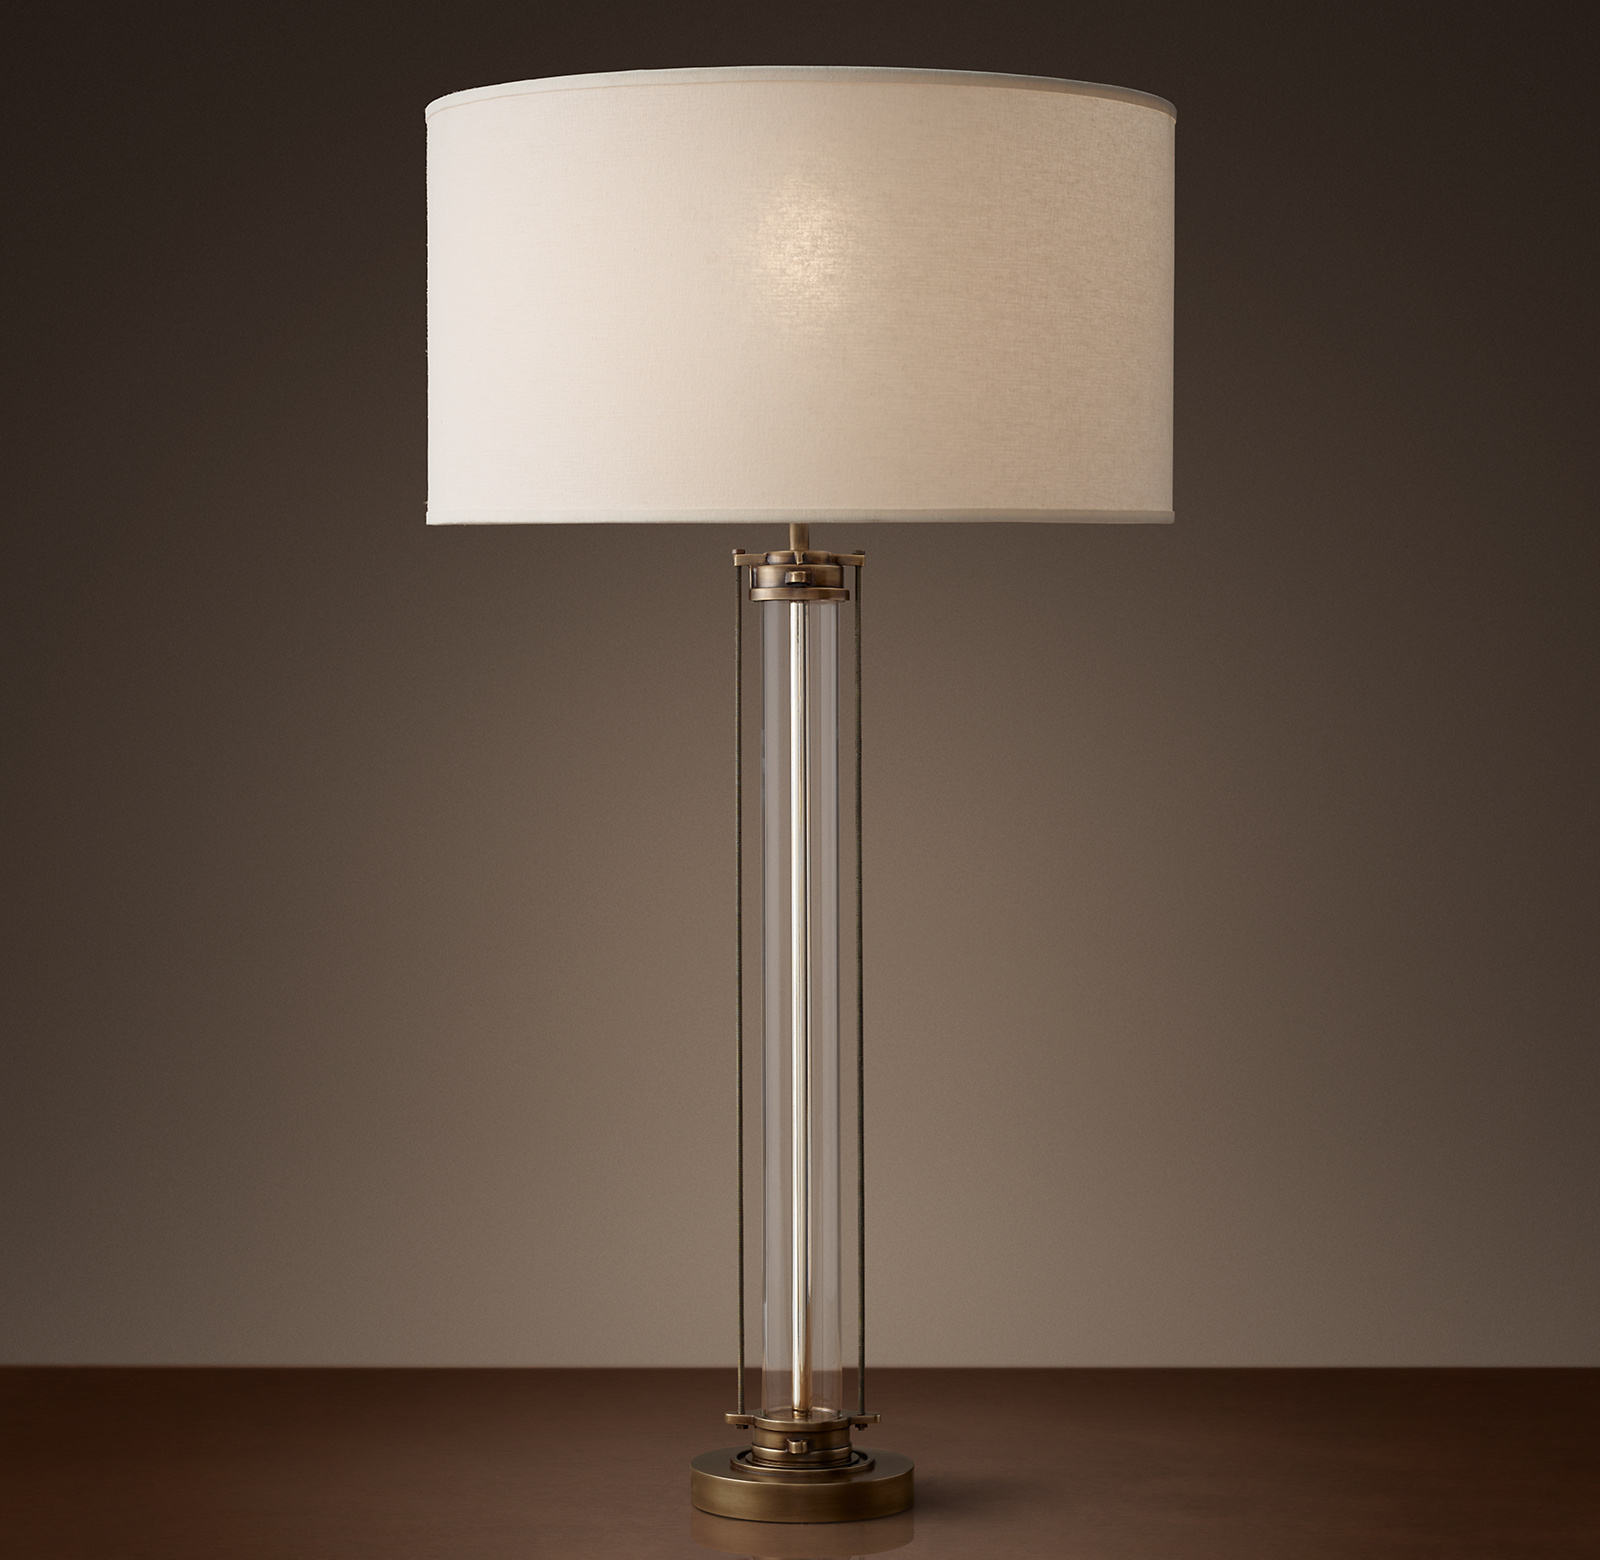 Shown in Vintage Brass with French Drum Linen Shade, size I, in White Linen and Frosted lining (sold separately).